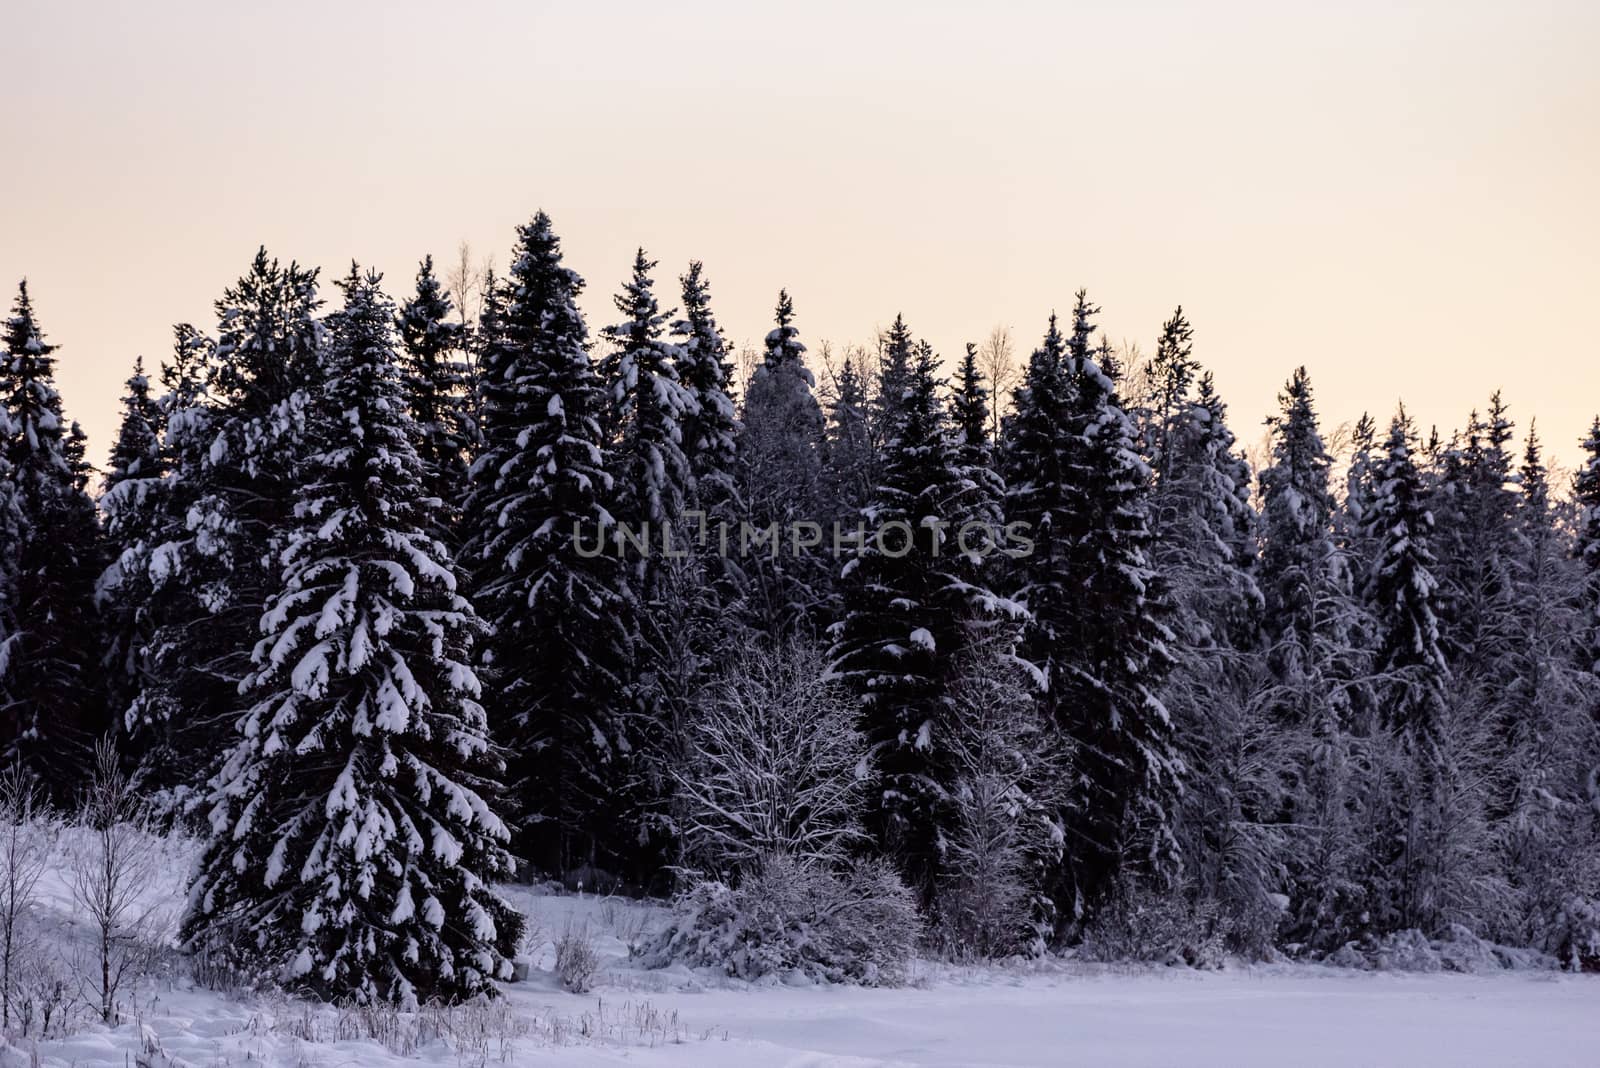 The ice lake and forest has covered with heavy snow and sunset sky in winter season at Holiday Village Kuukiuru, Finland.